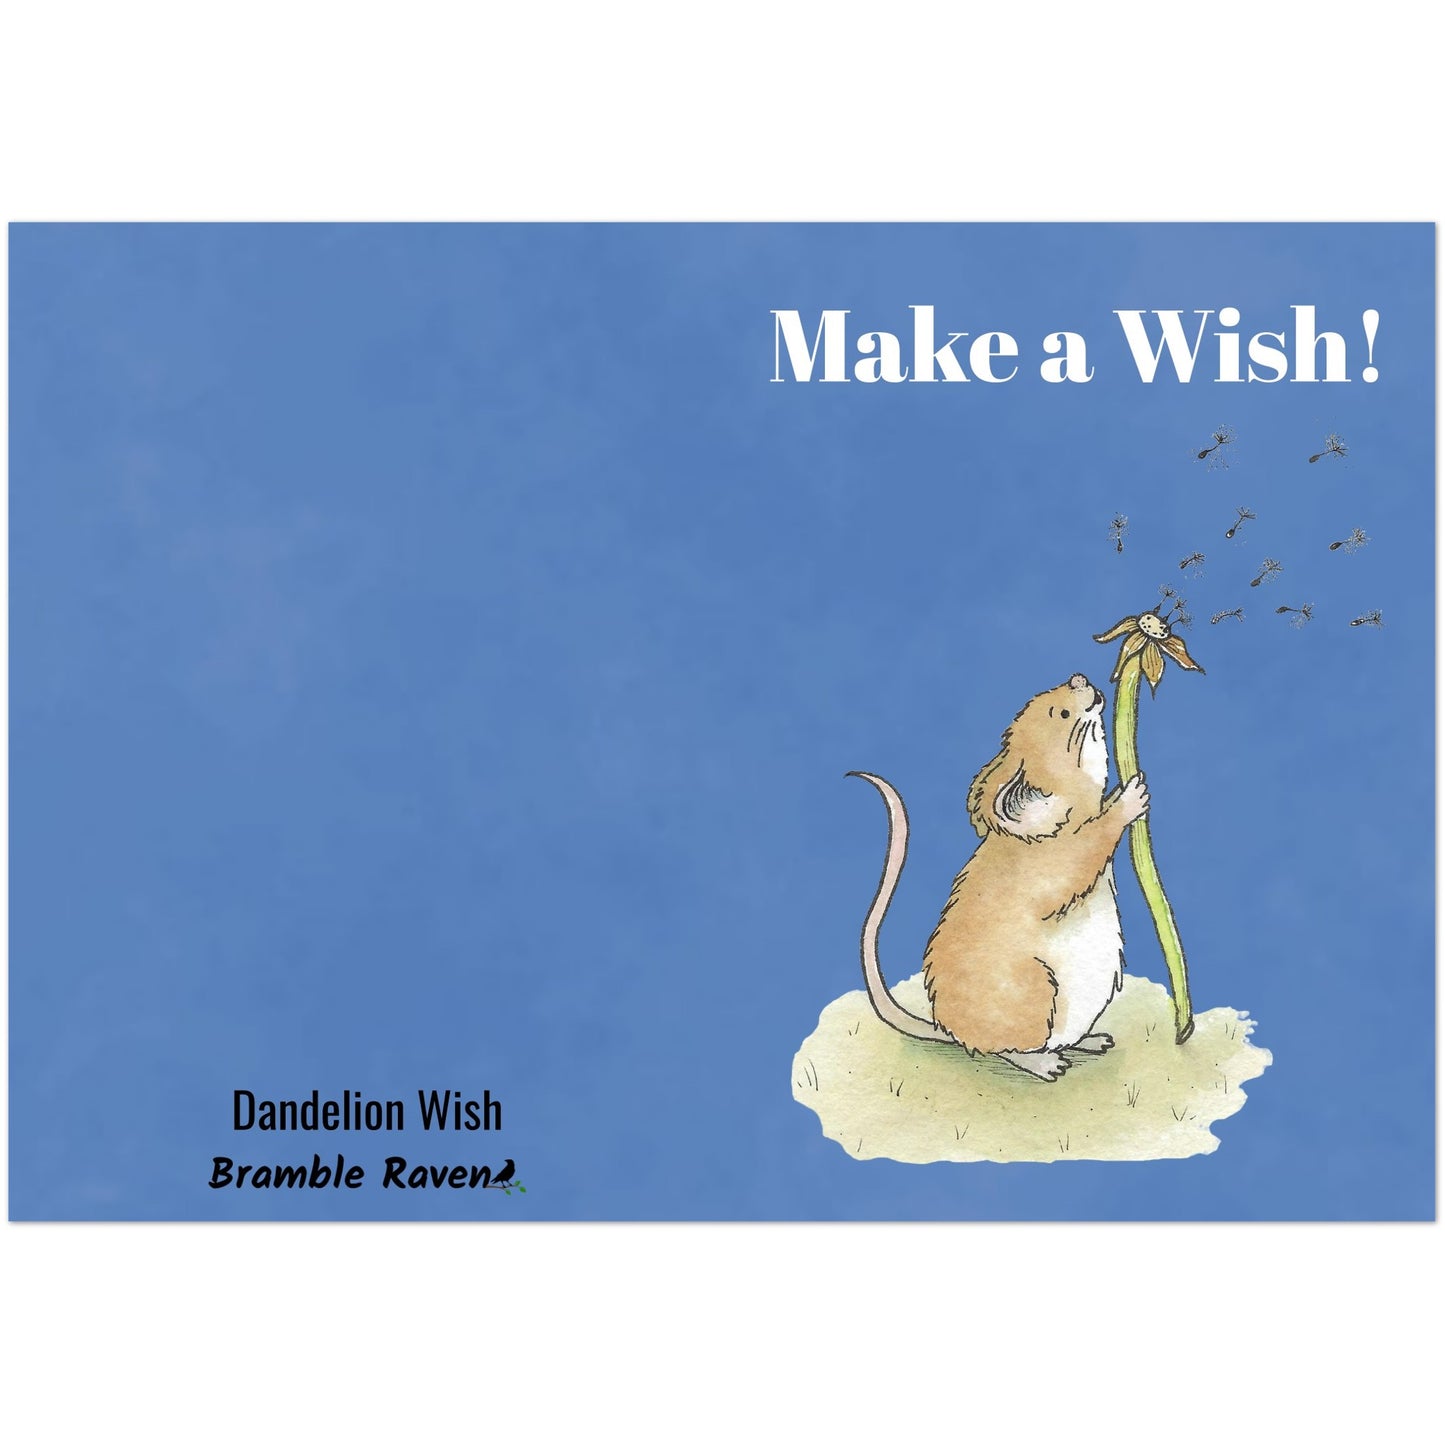 Ten fun greeting cards with envelopes. The front features white "Make a wish!" text and our watercolor dandelion wish mouse on a blue background. Inside is blank. Made with thick 350 gsm 150lb coated paperboard with vibrant printing.  Cards measure 5 by 7 inches.